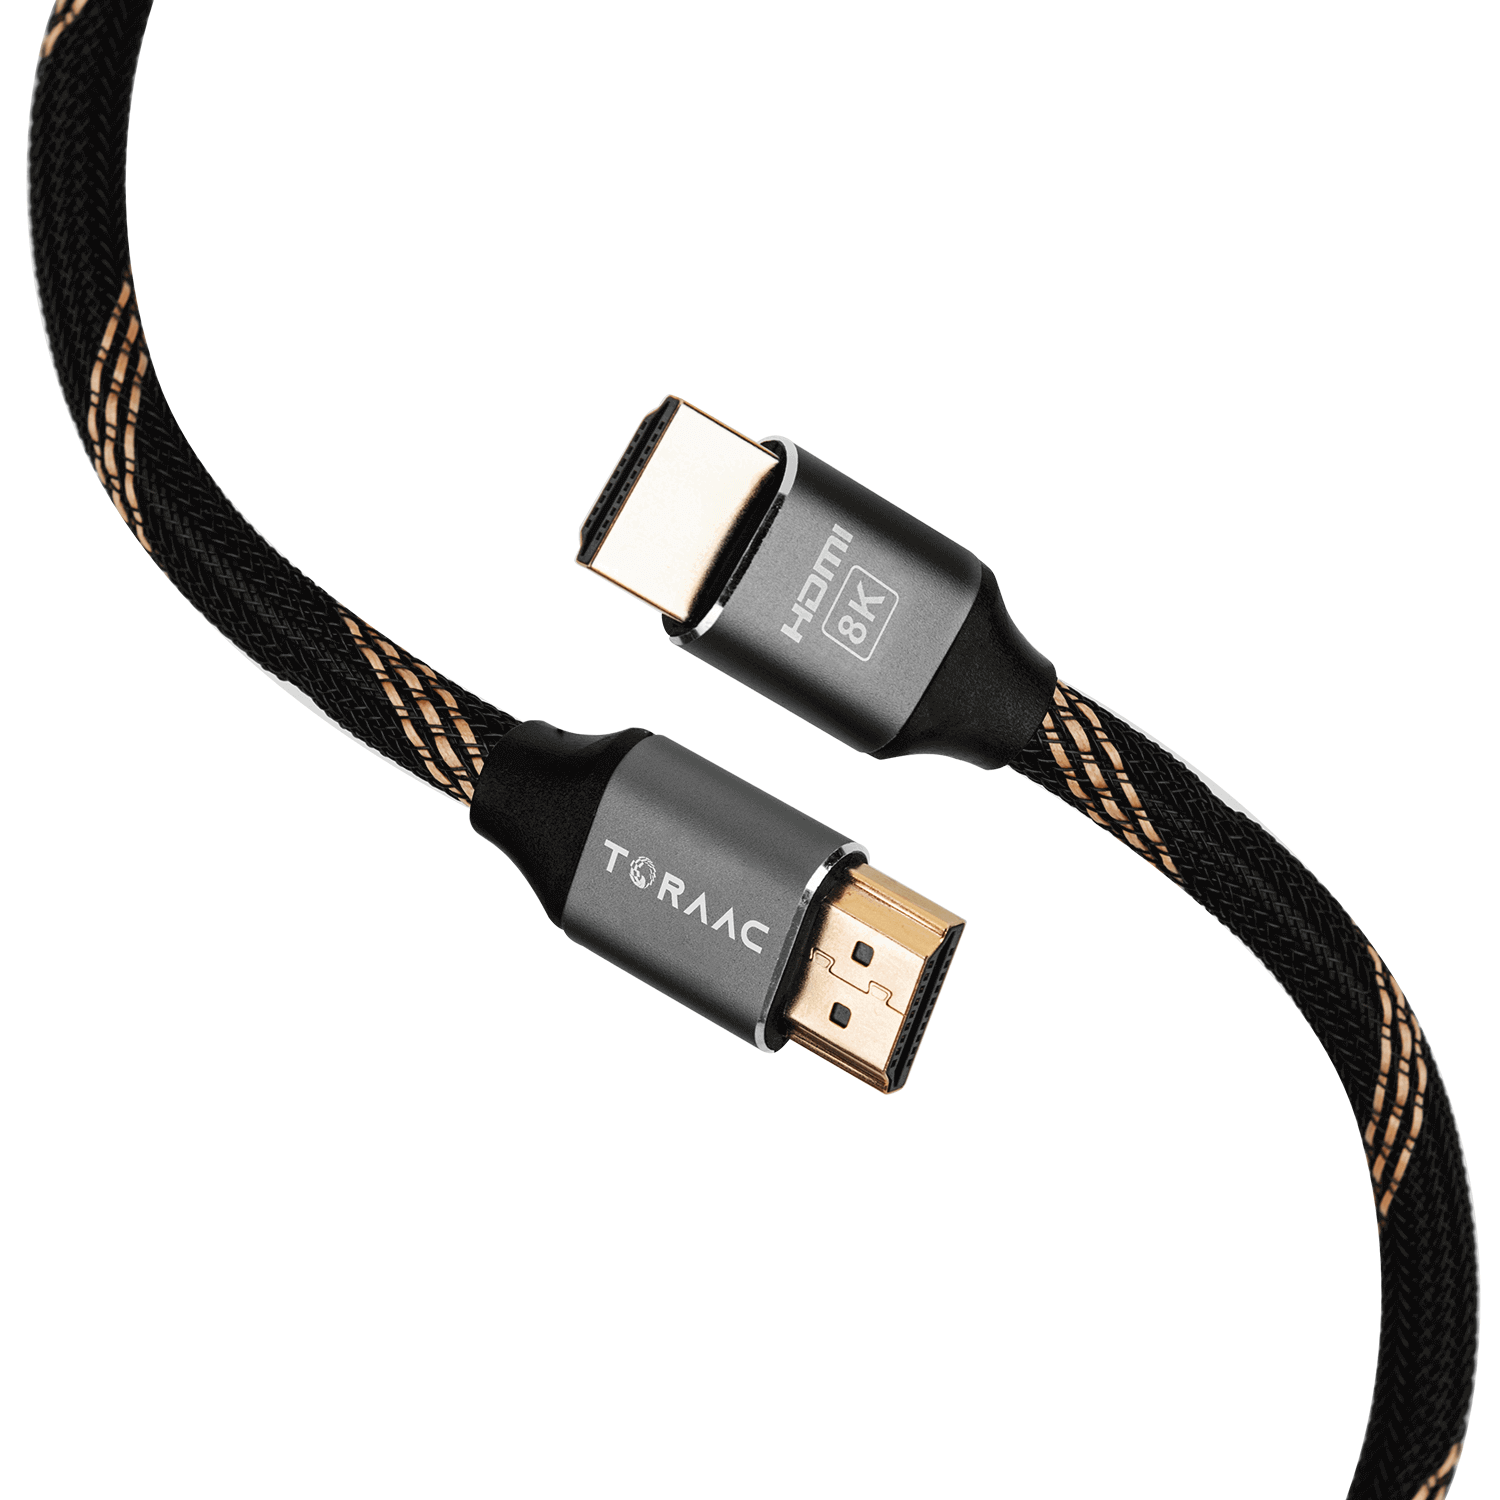 8k braided HDMI cable